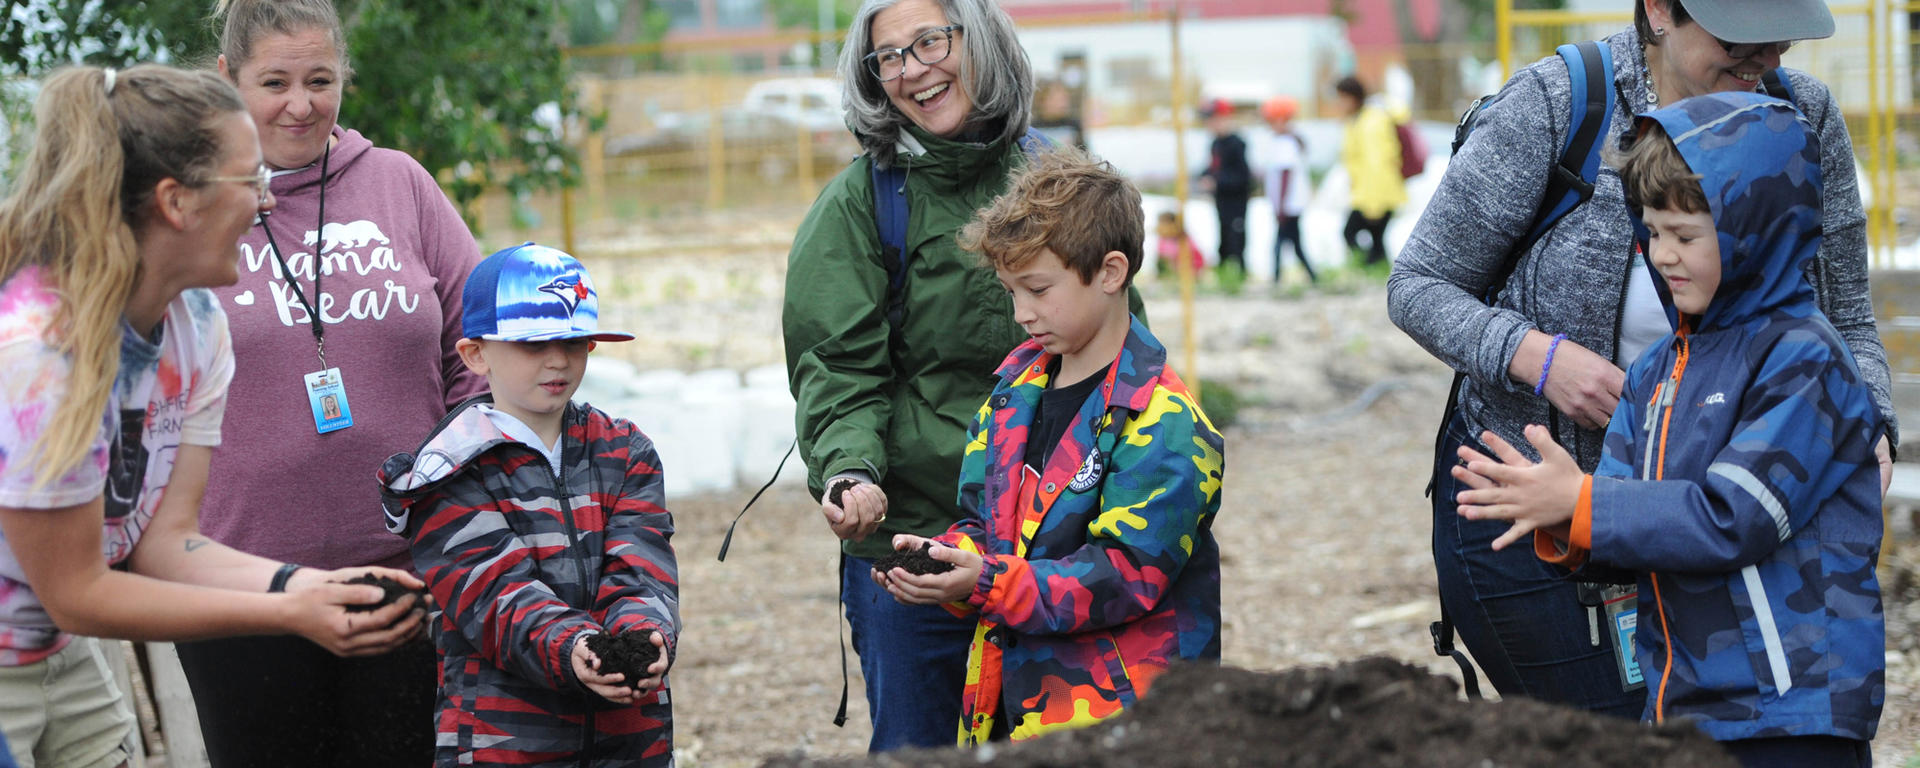 Students learn about sustainable agricultural practices through an innovative partnership between the Werklund School and Highfield Regenerative Farm